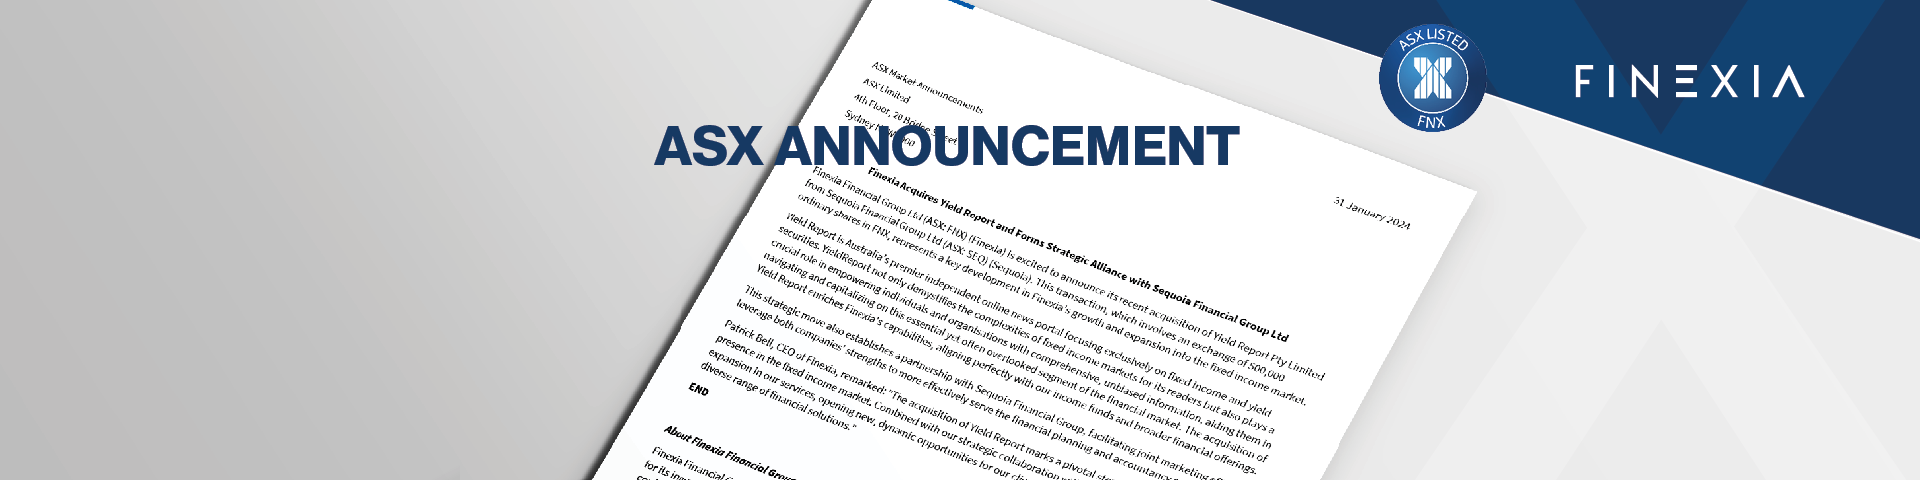 Finexia Financial Expands into Fixed Income with Yield Report Acquisition | ASX Update